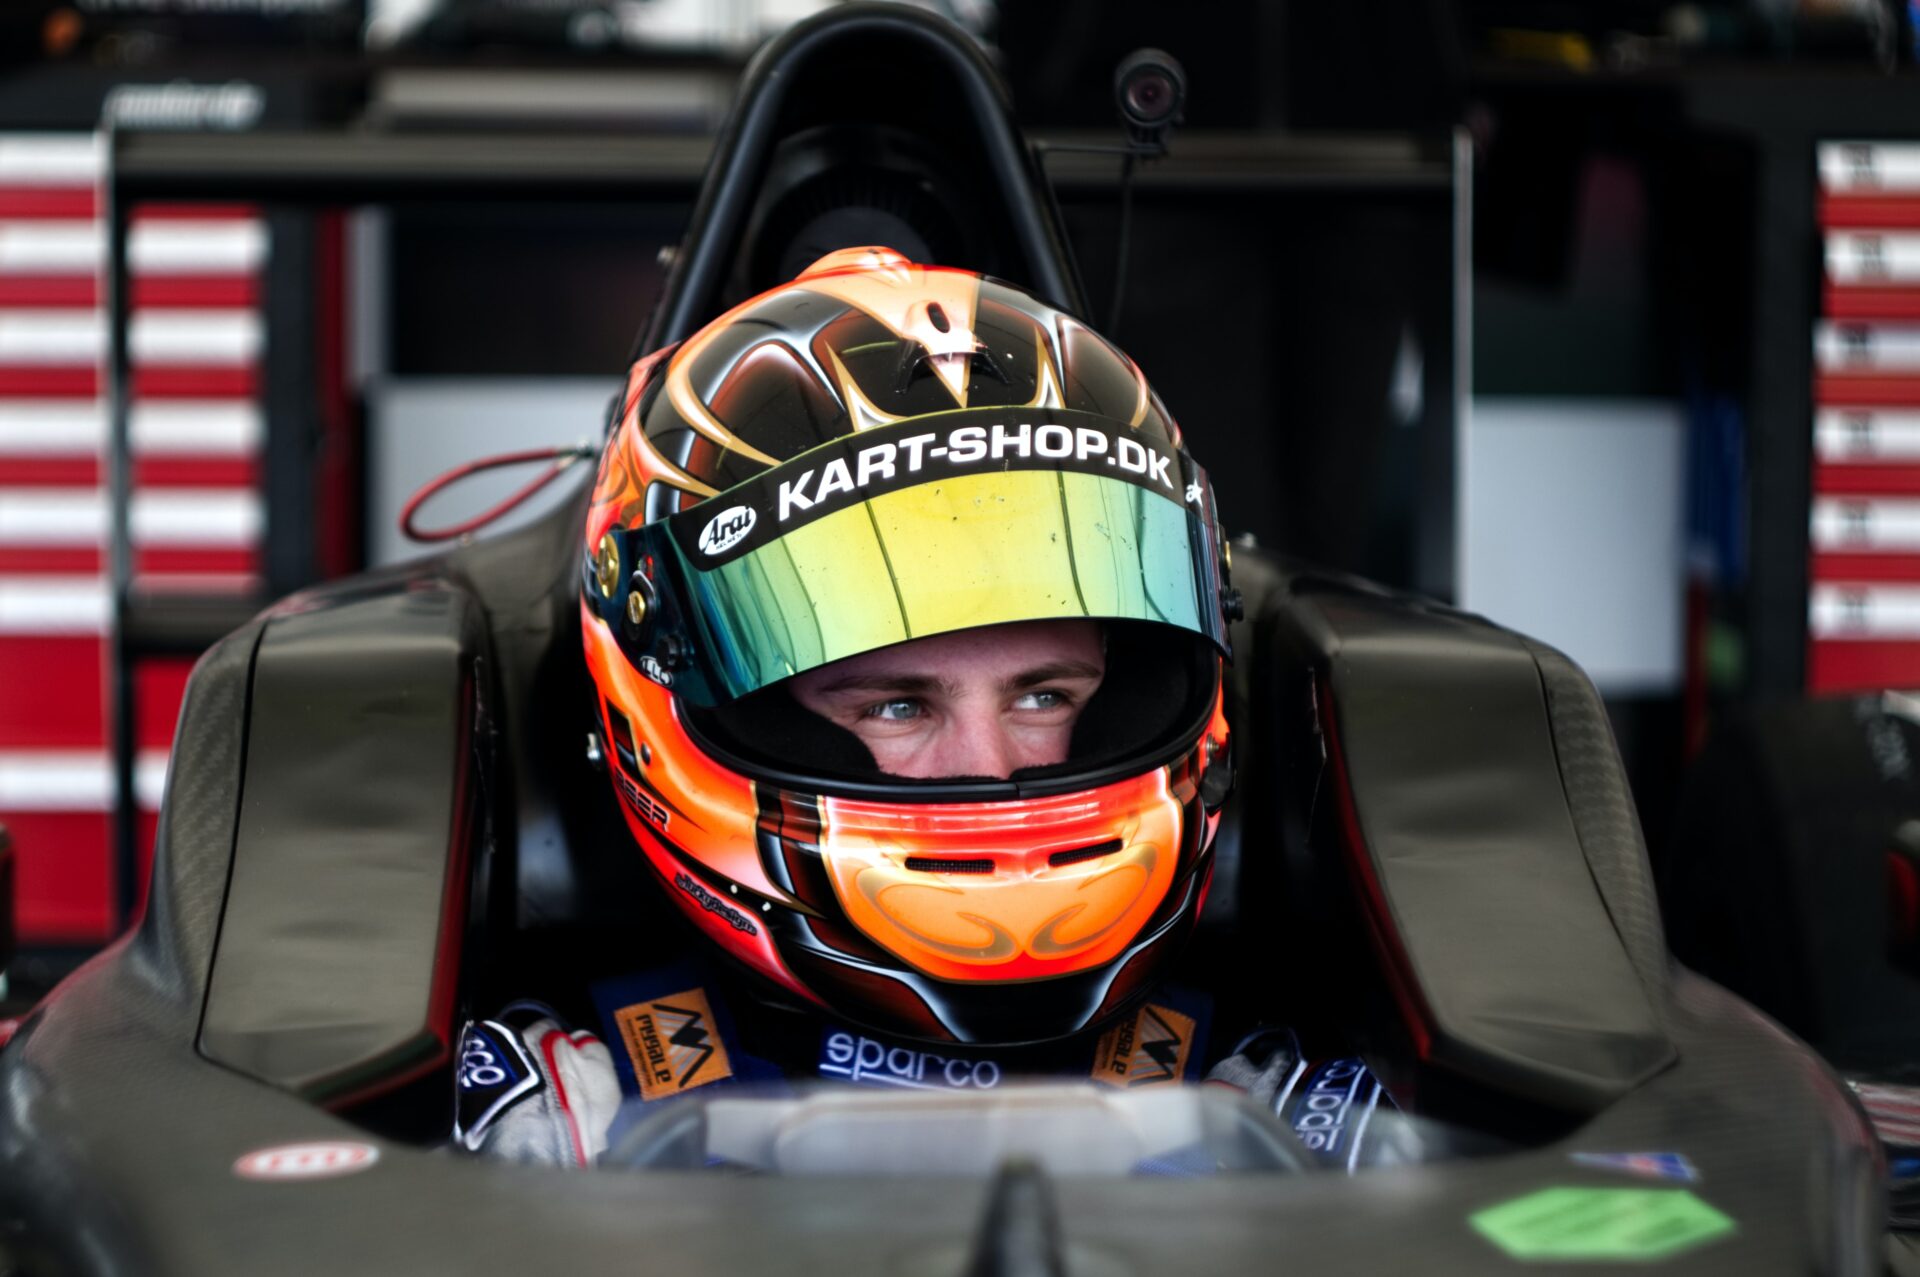 a photo of a race car driver smiling in his car